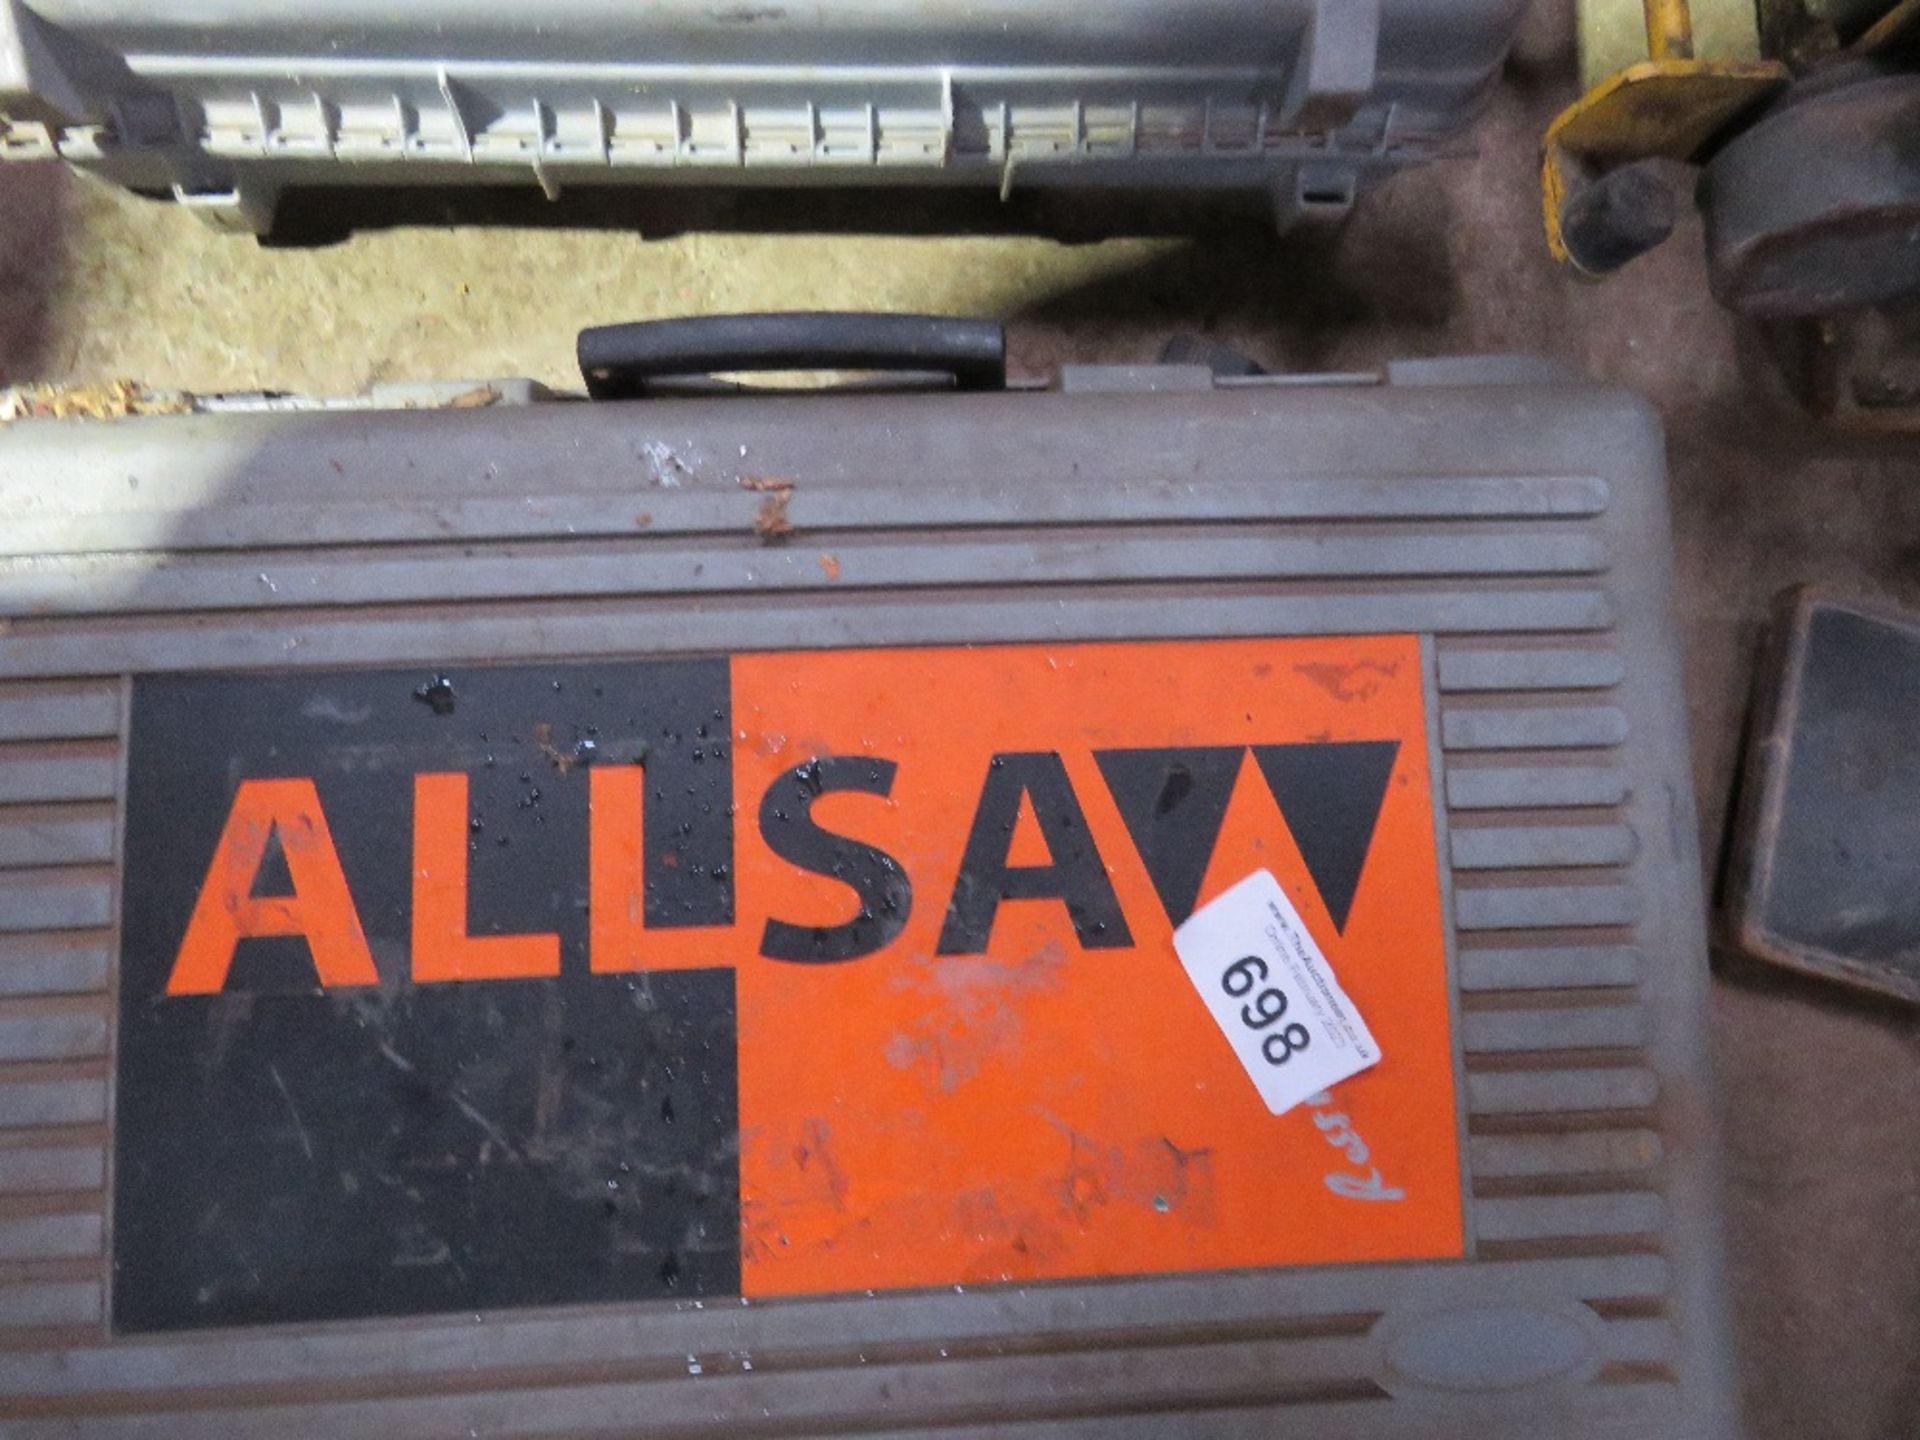 ALLSAW 110VOLT POWERED RECIPROCATING BLOCK SAW IN A CASE. - Image 2 of 3